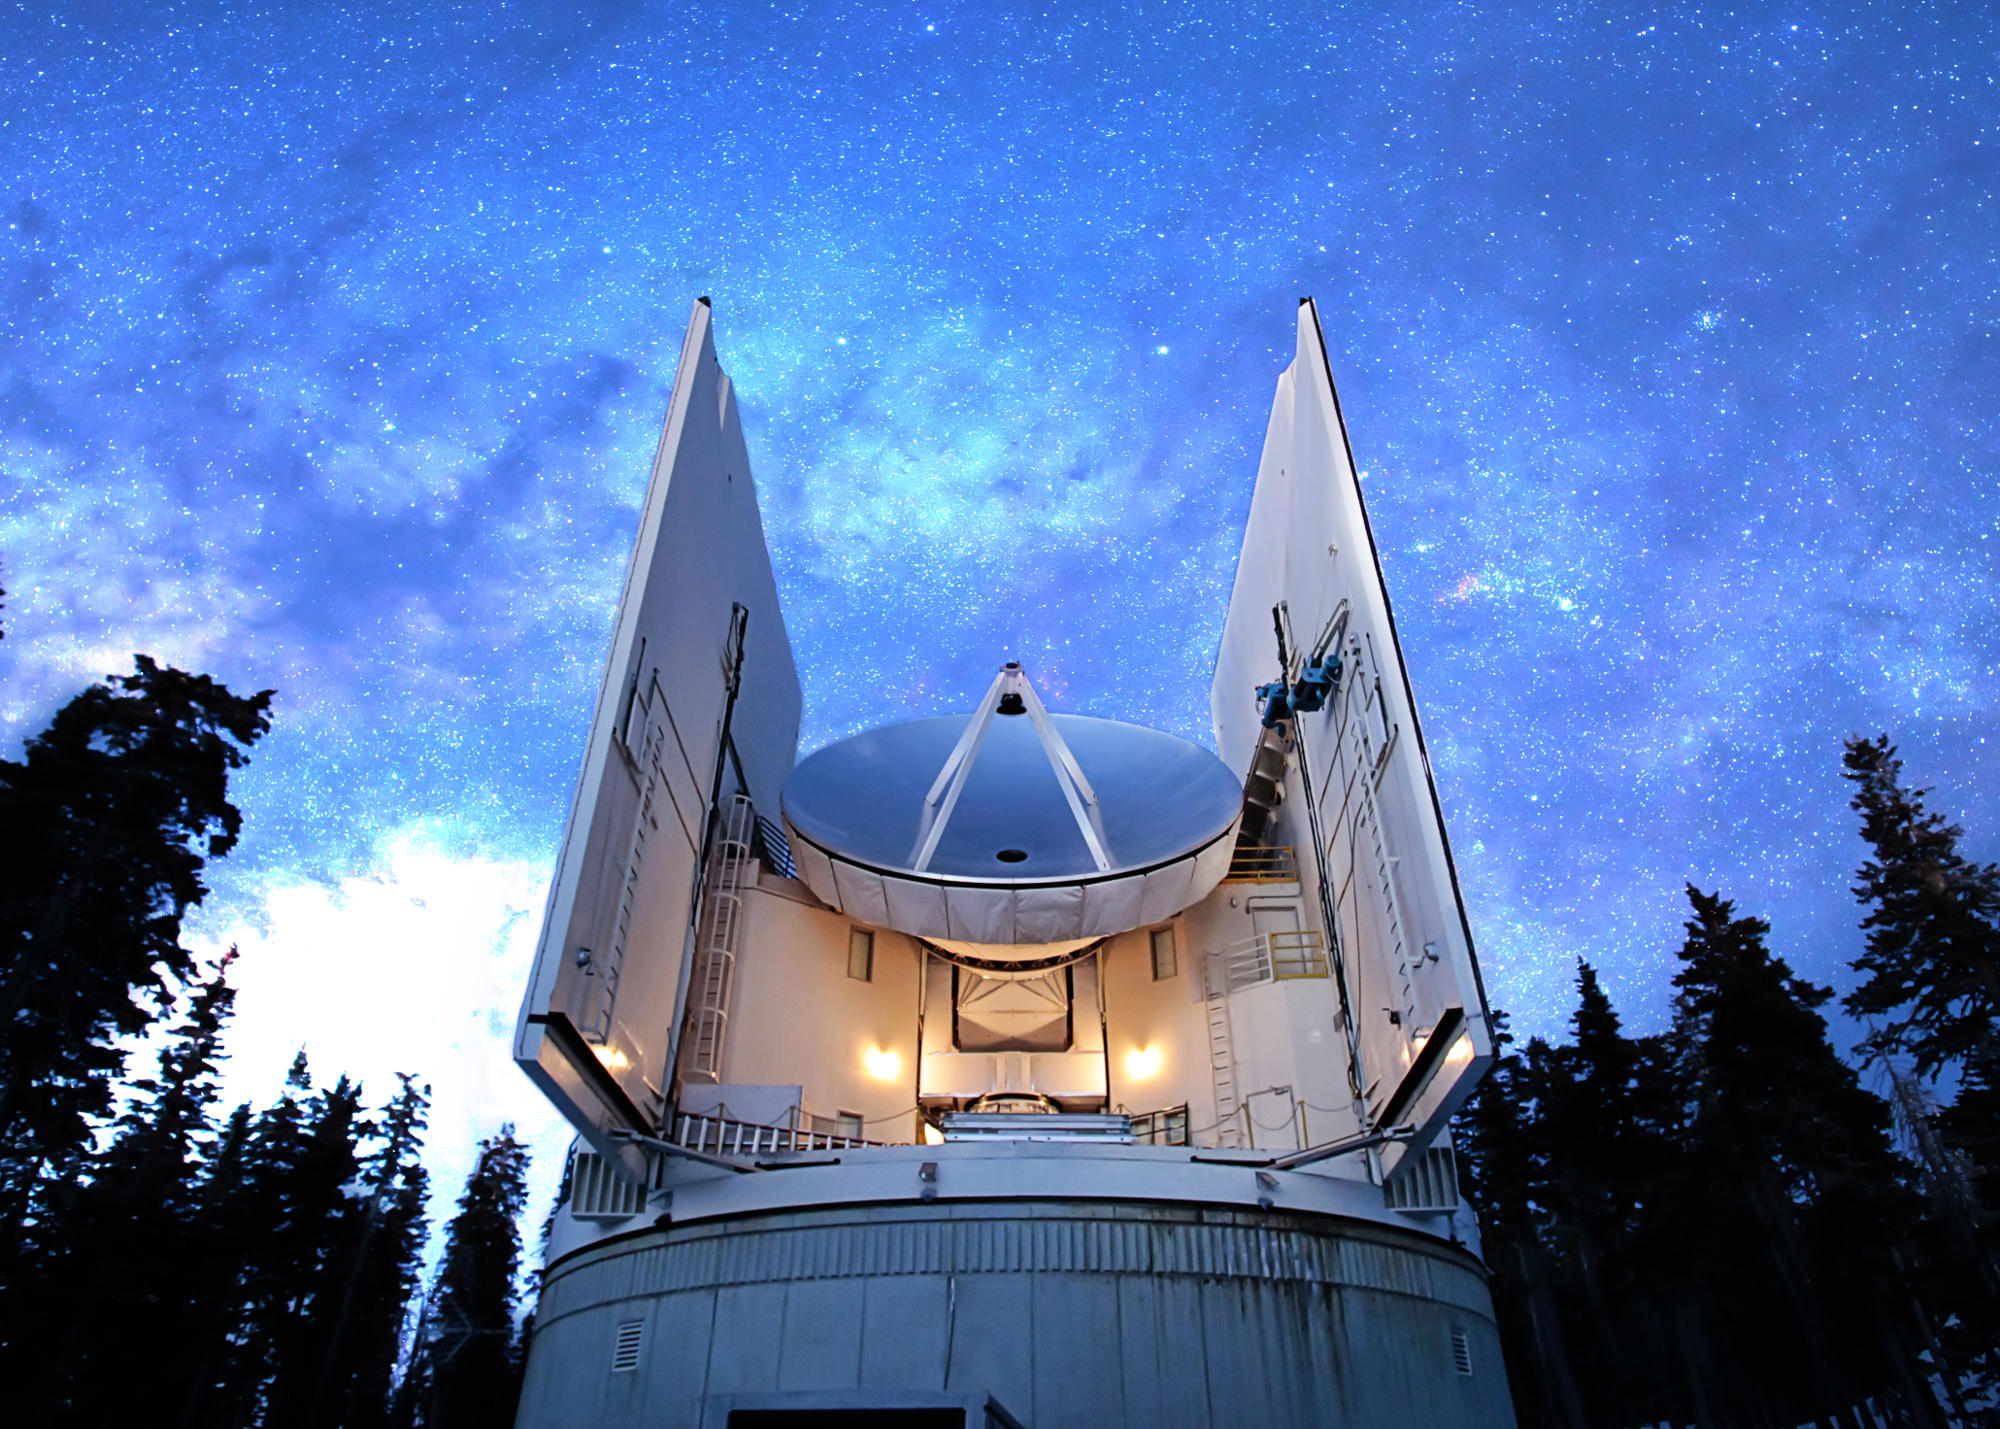 The Submillimeter Telescope under the night sky.